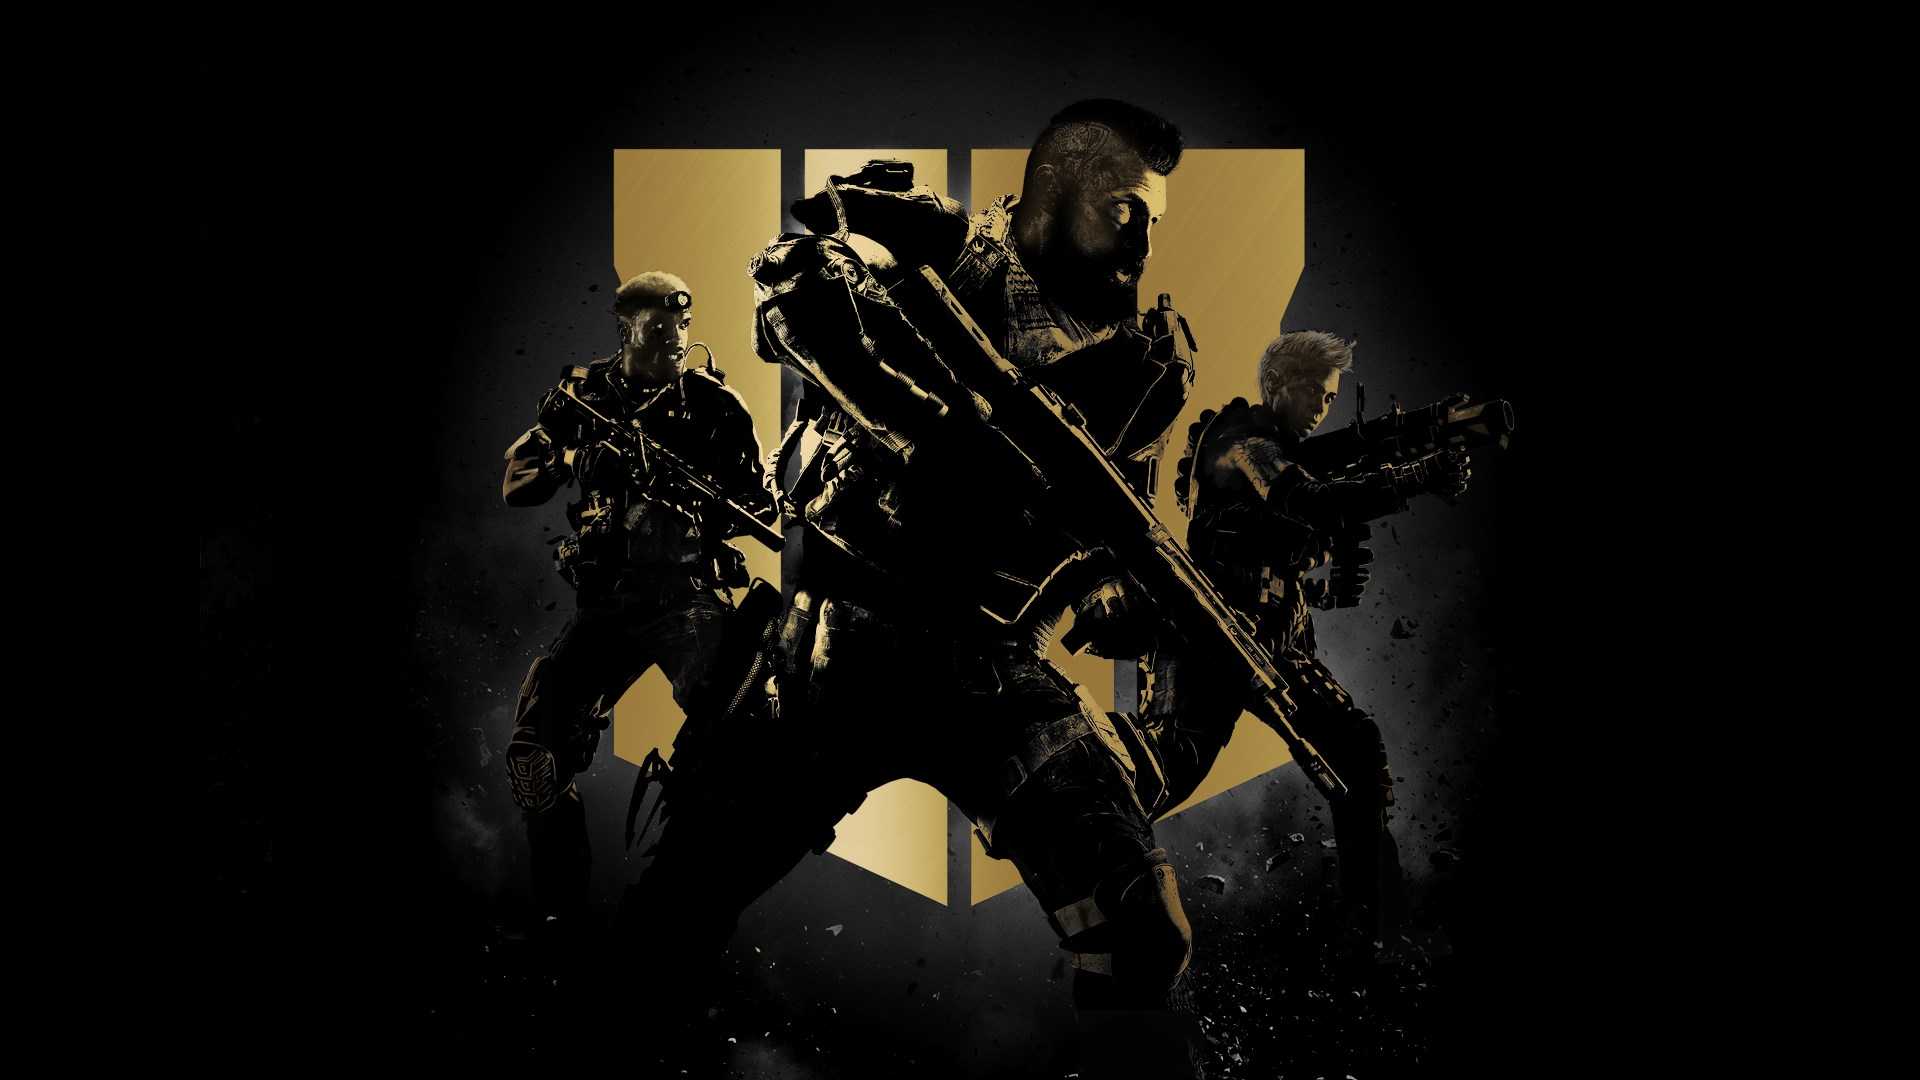 8 call of duty black ops 4 background